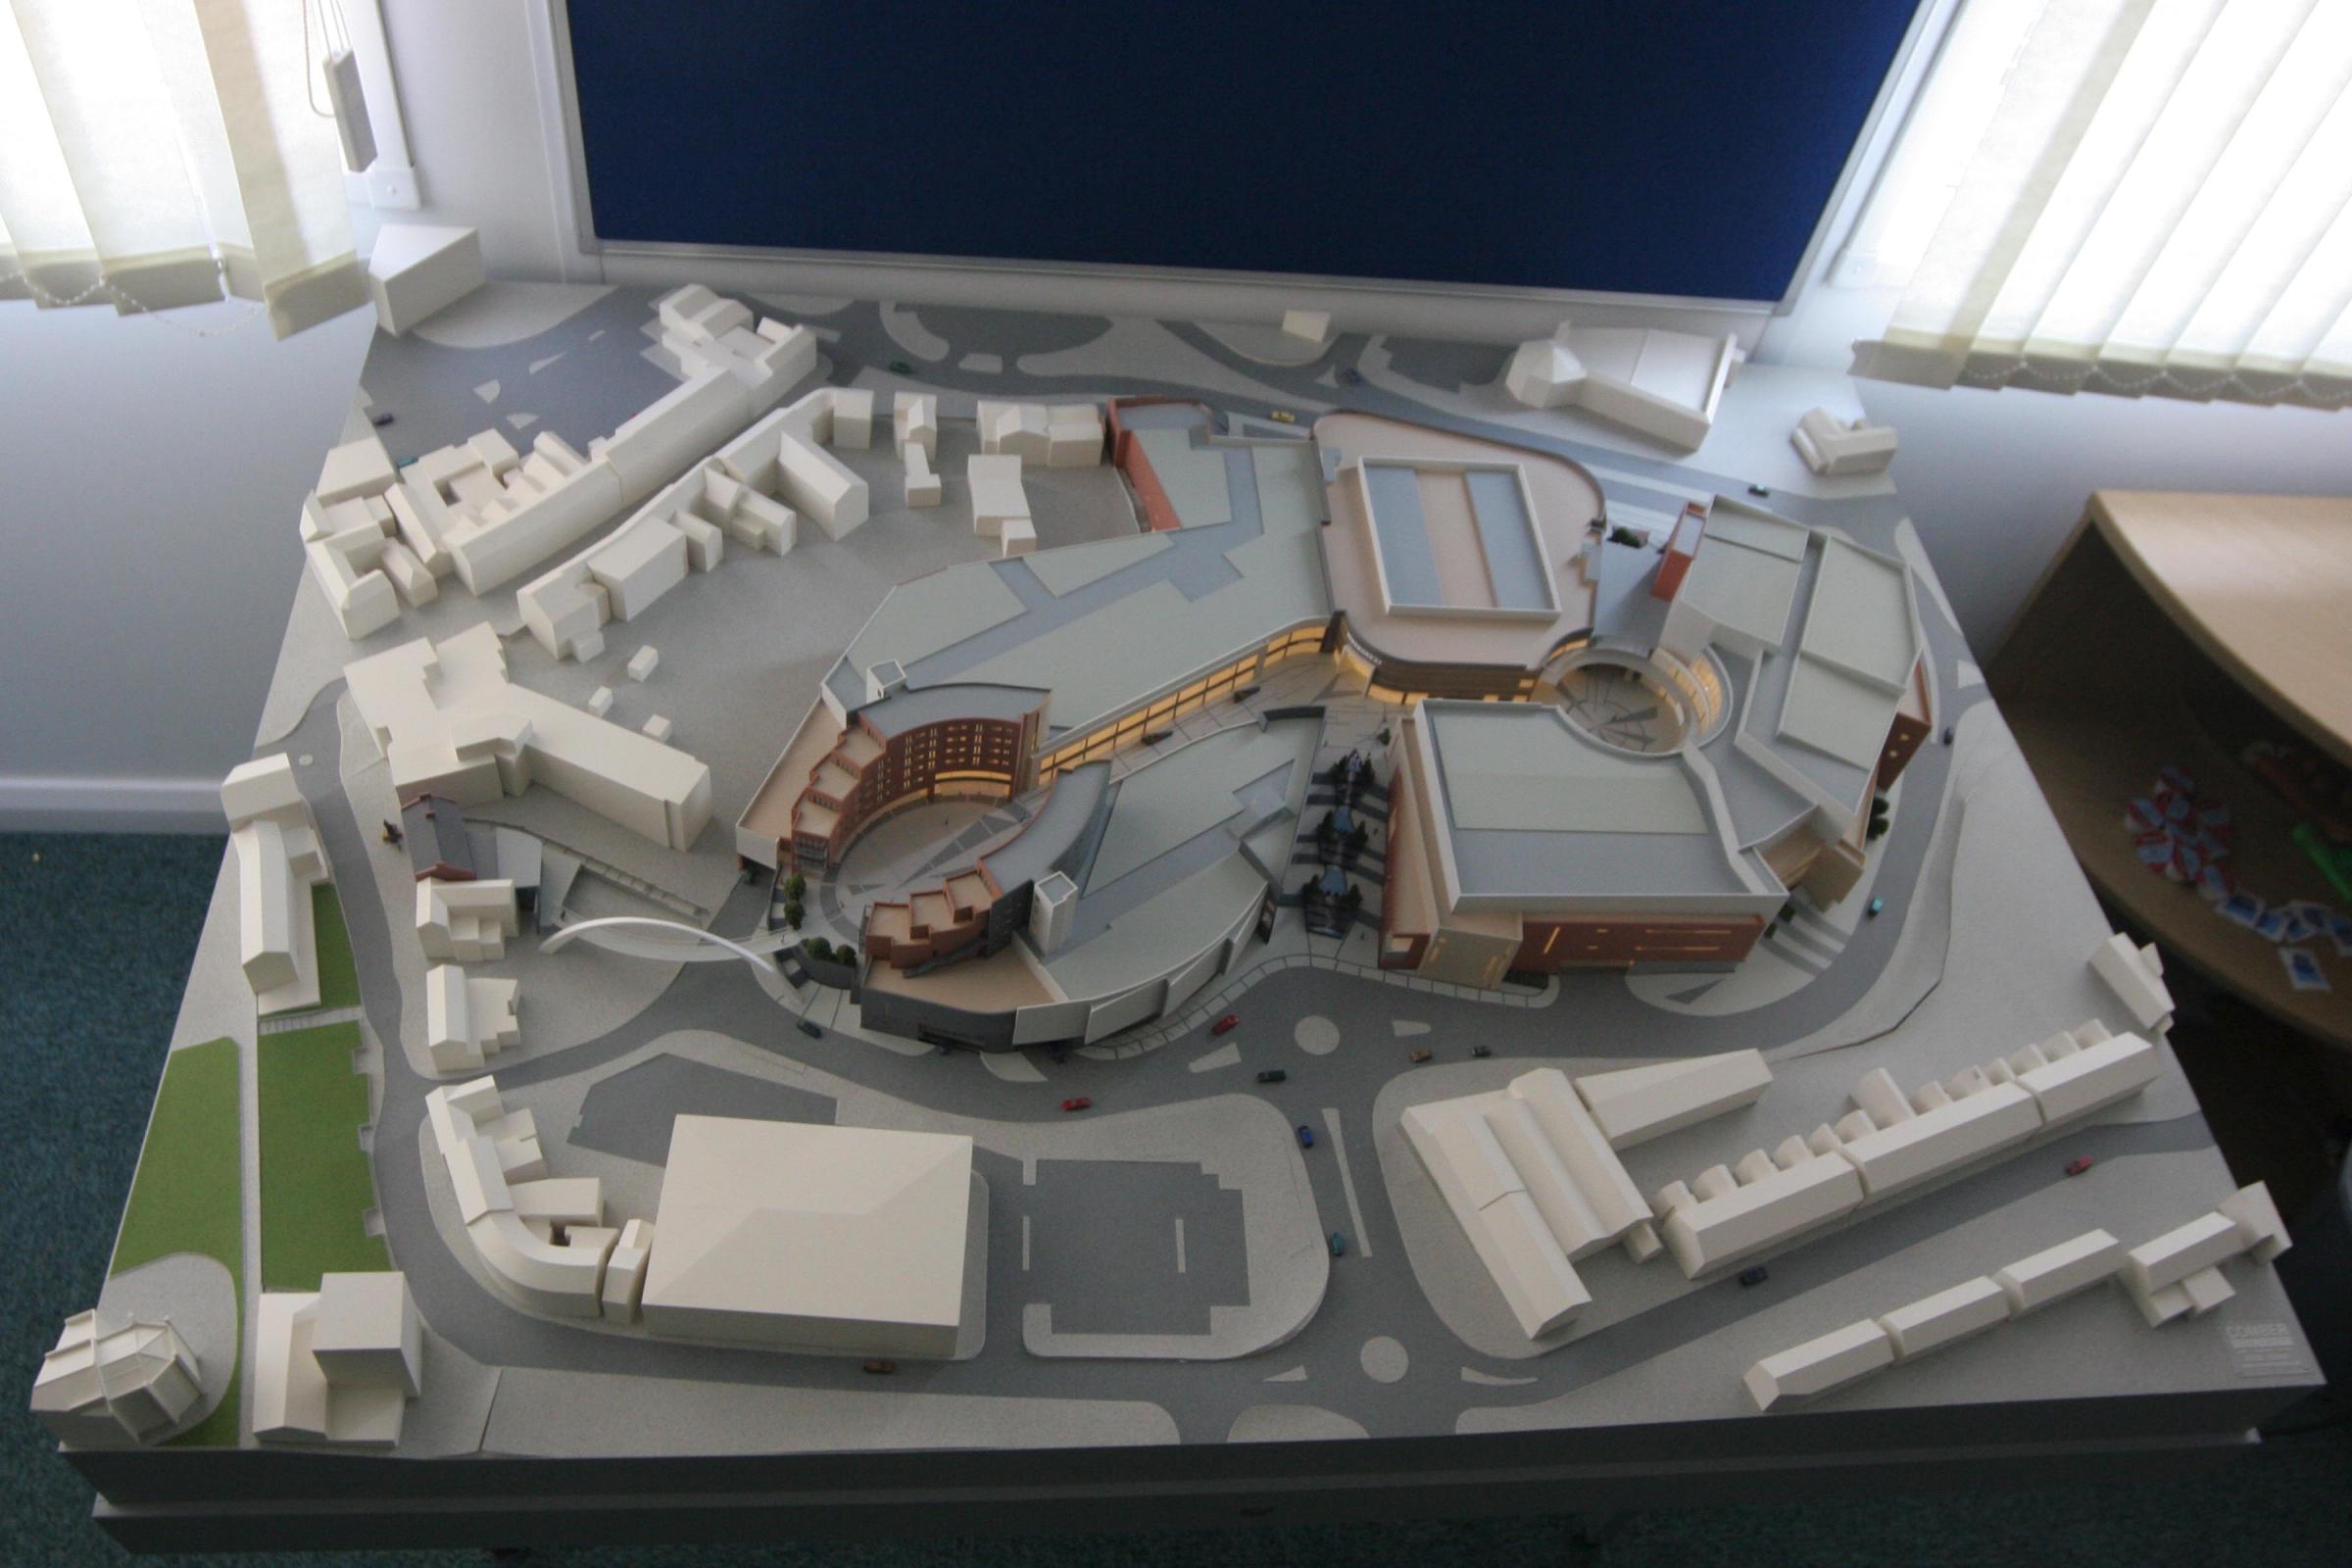 The scale model of Eagles Meadow develpment.